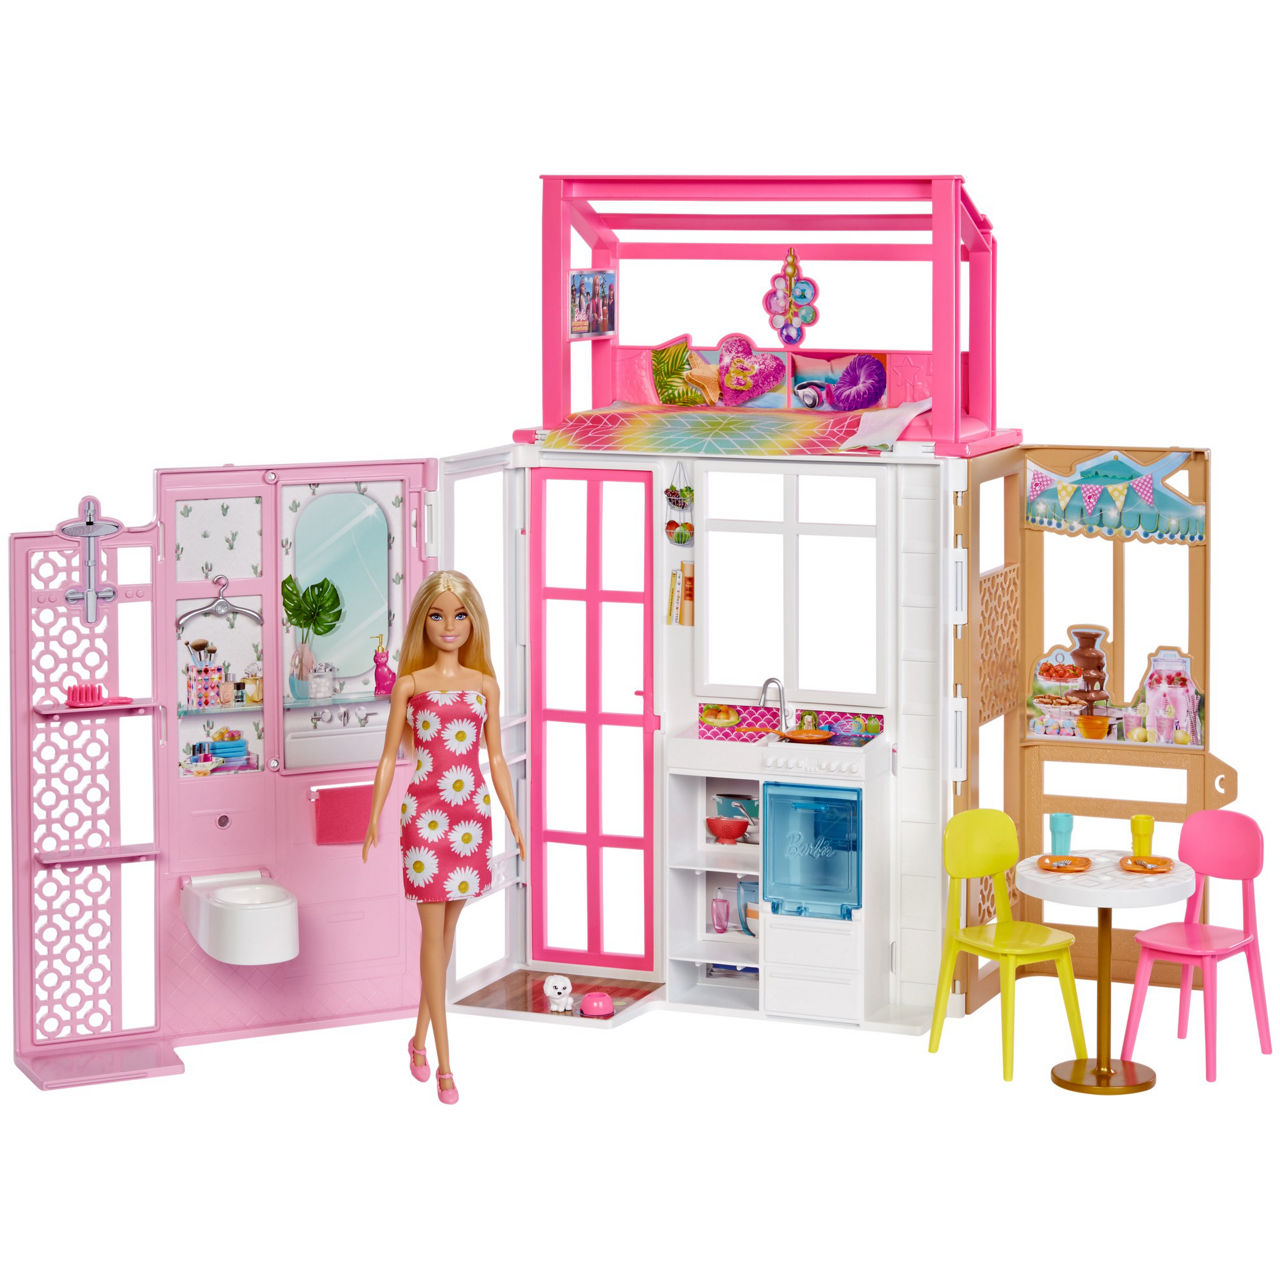 2-Story House & Doll Set | Lots